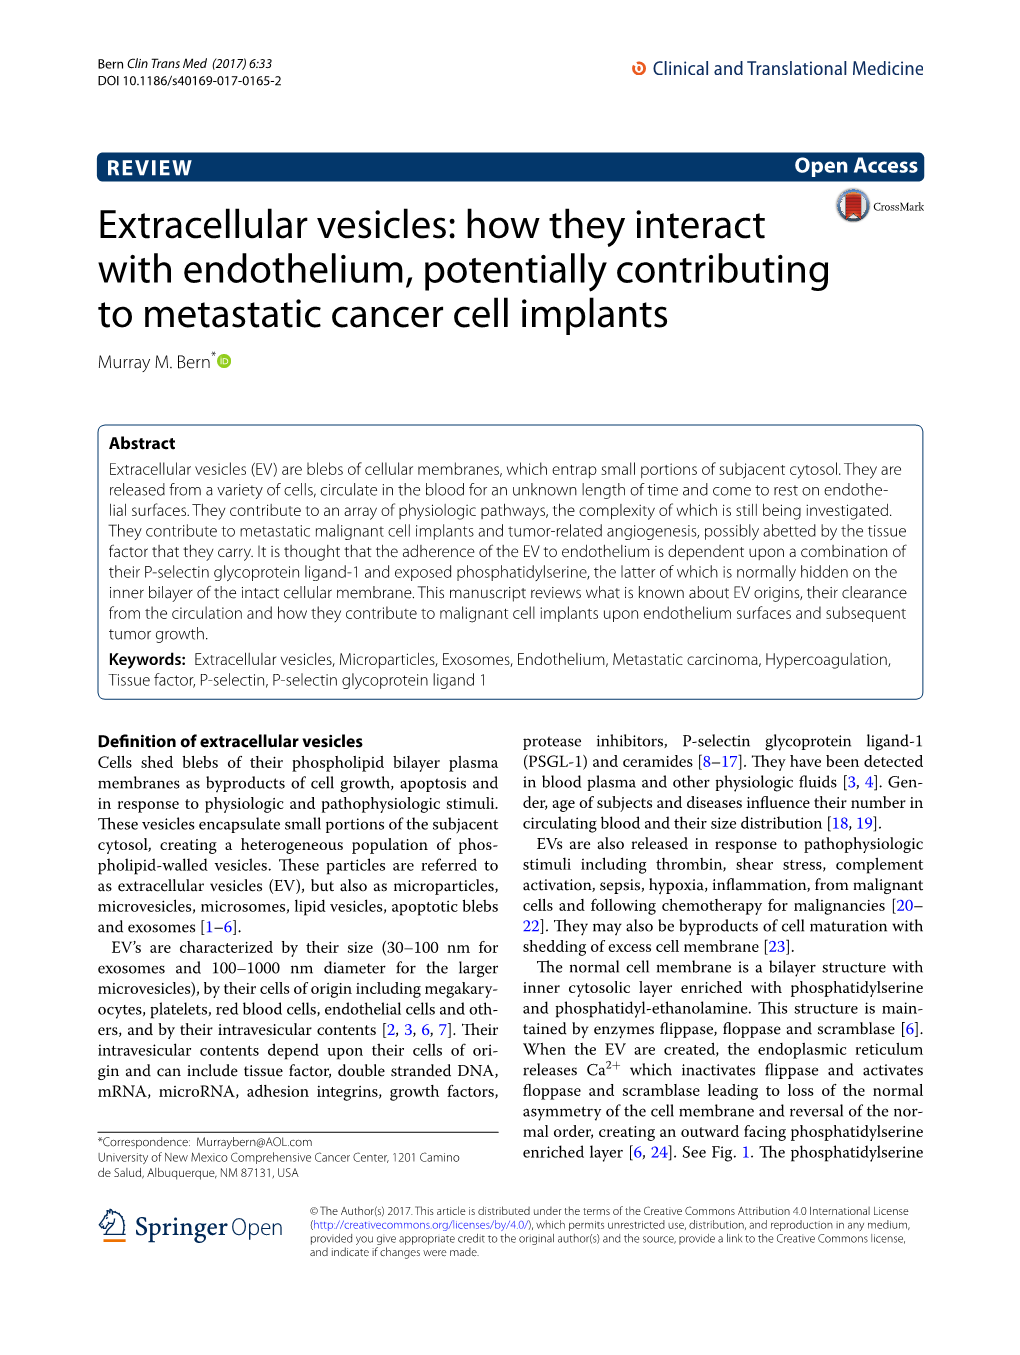 Extracellular Vesicles: How They Interact with Endothelium, Potentially Contributing to Metastatic Cancer Cell Implants Murray M